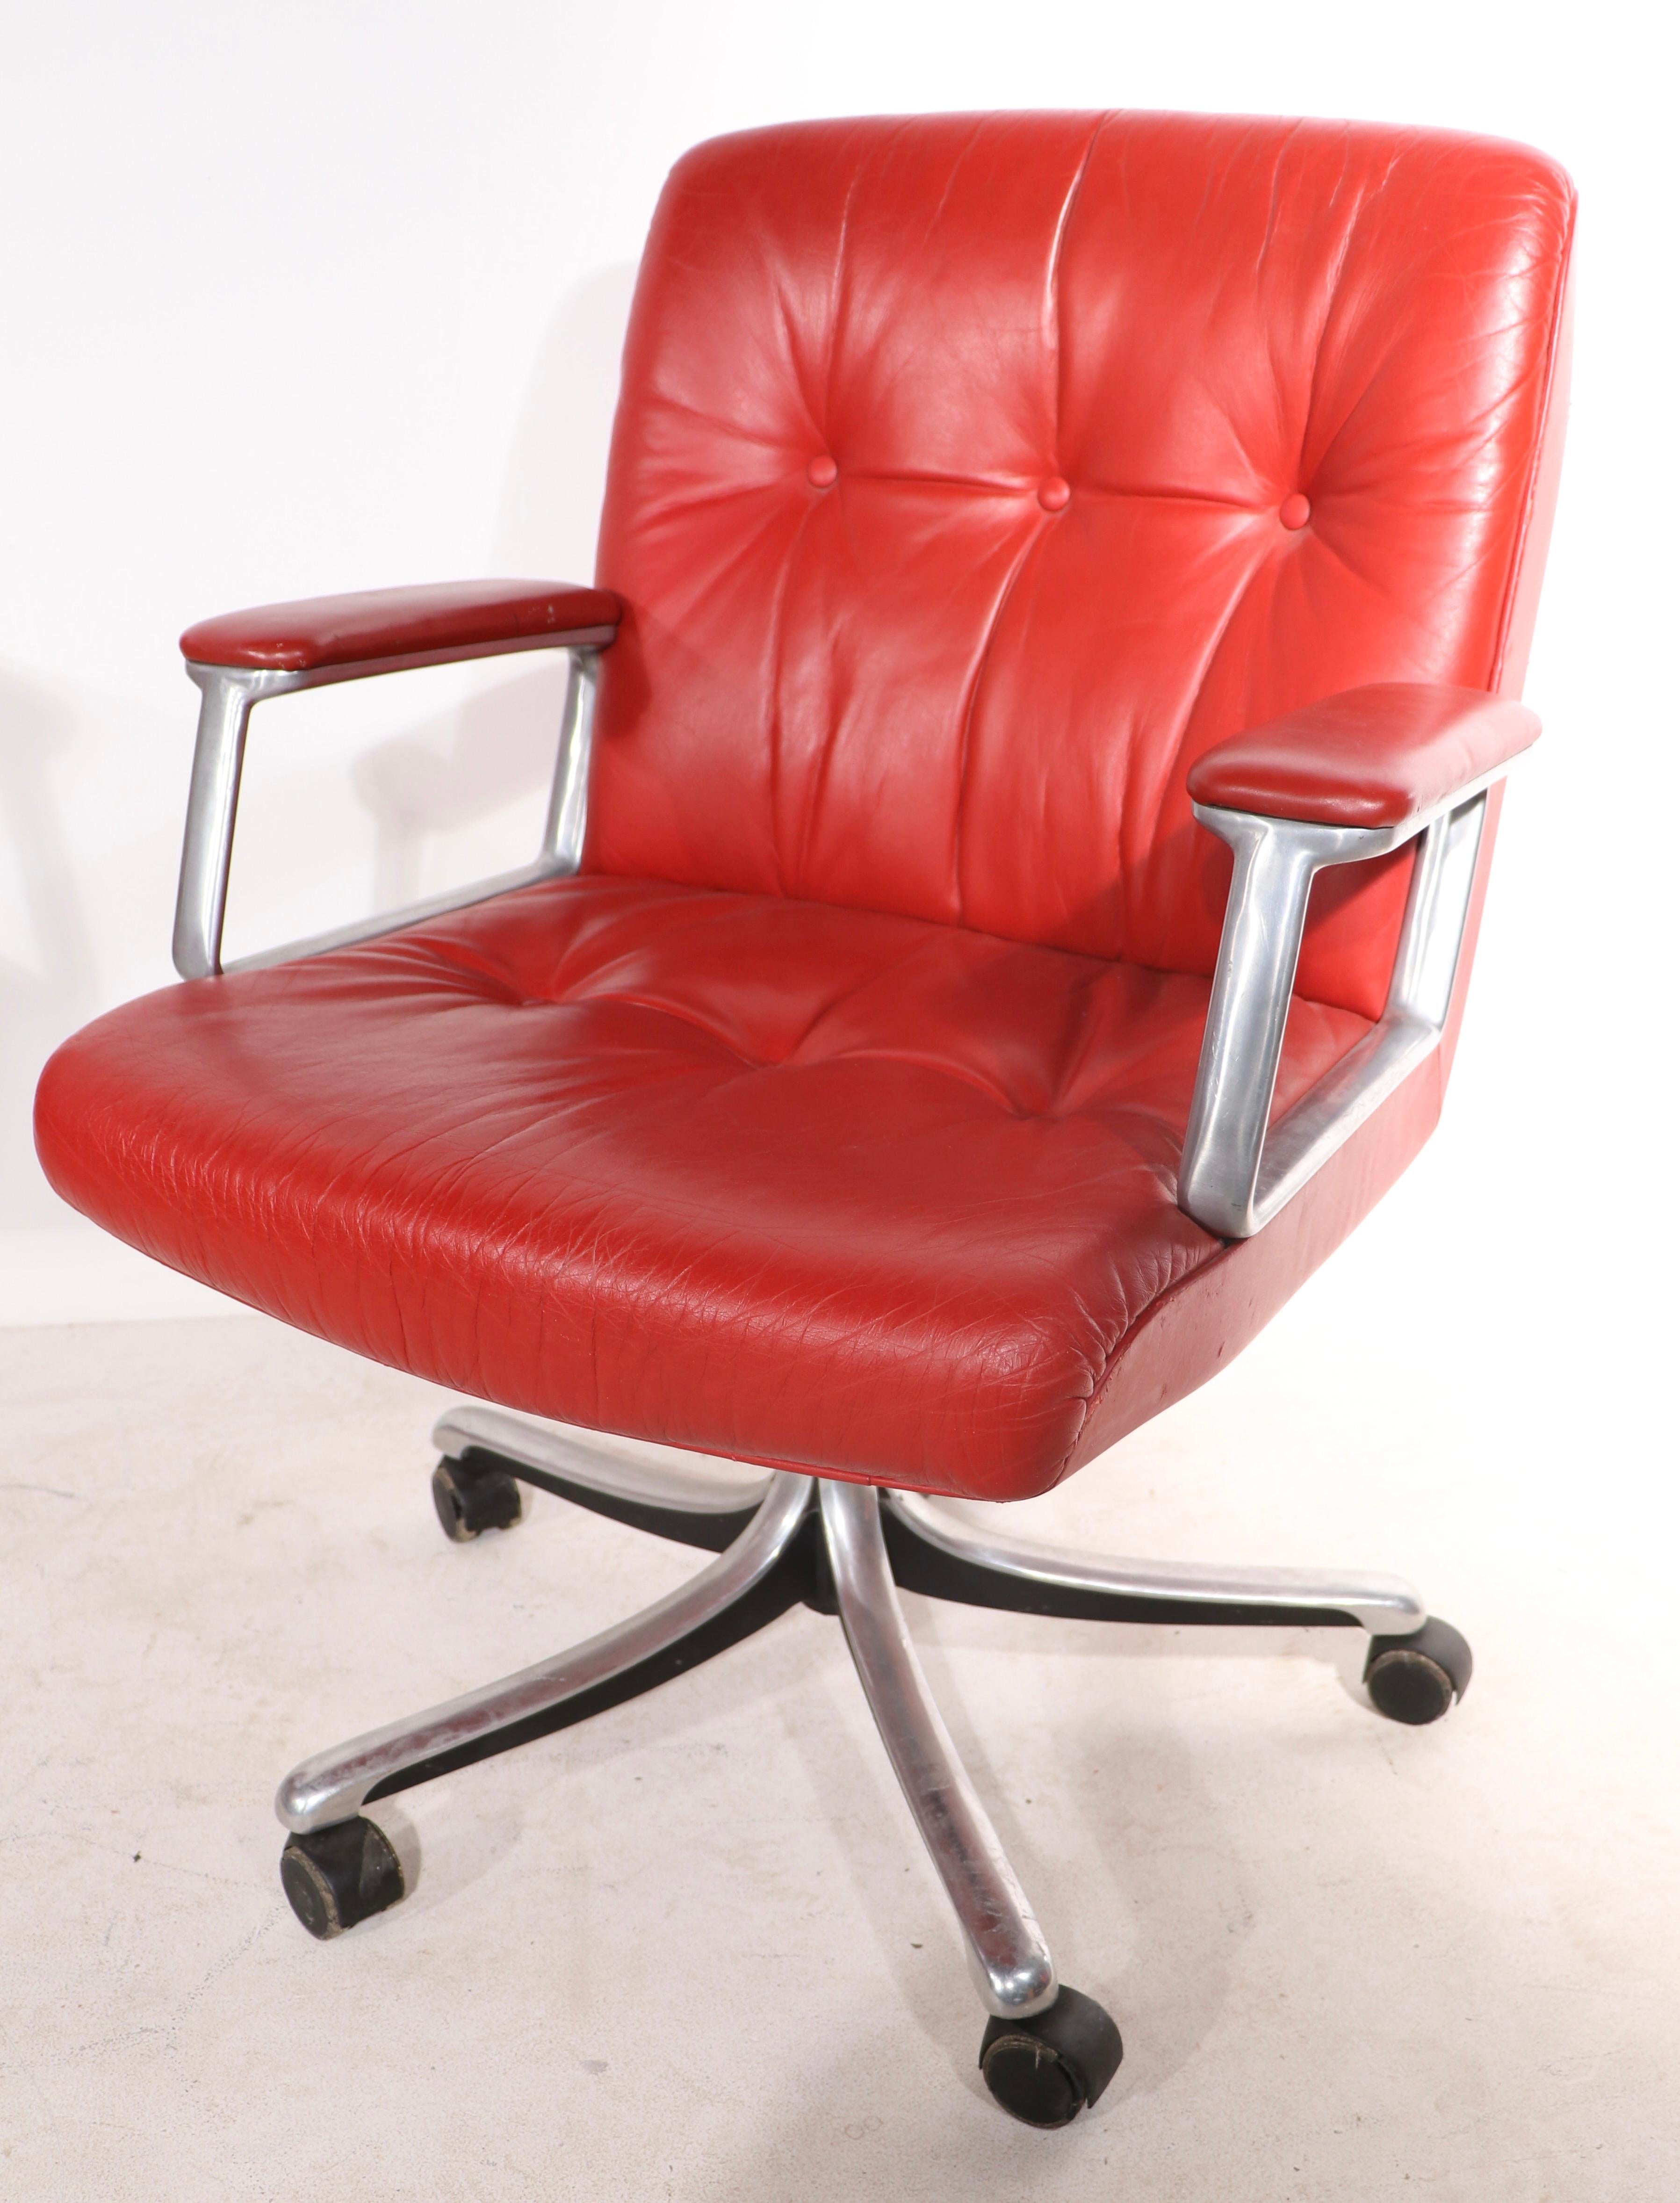 8 P128 Borsani Swivel Desk Chairs in Lipstick Red Leather Upholstery  6